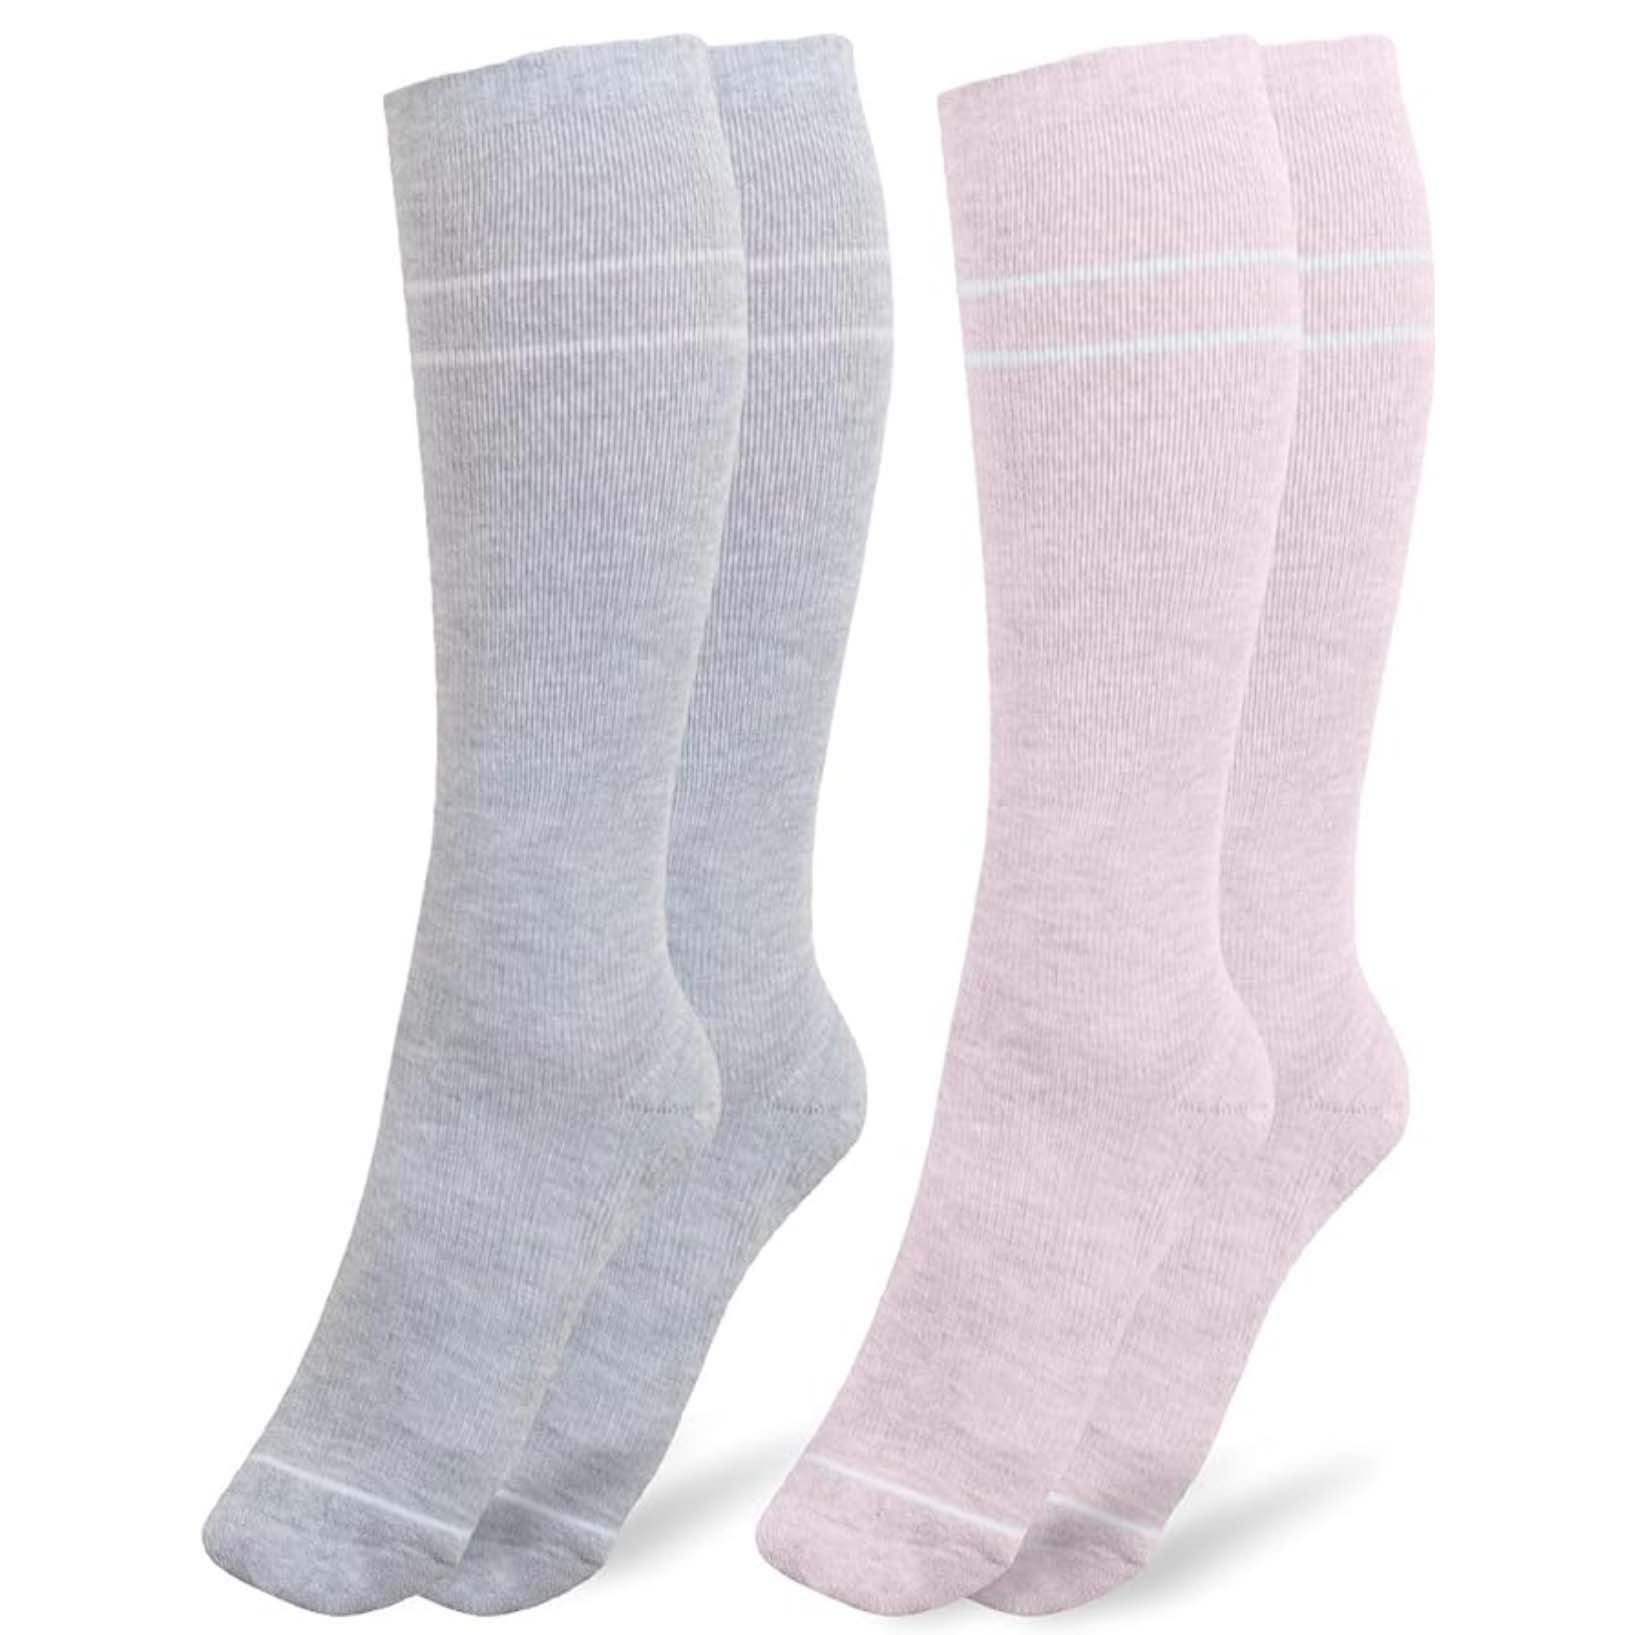 2 pairs of Grey and pink knee-high socks